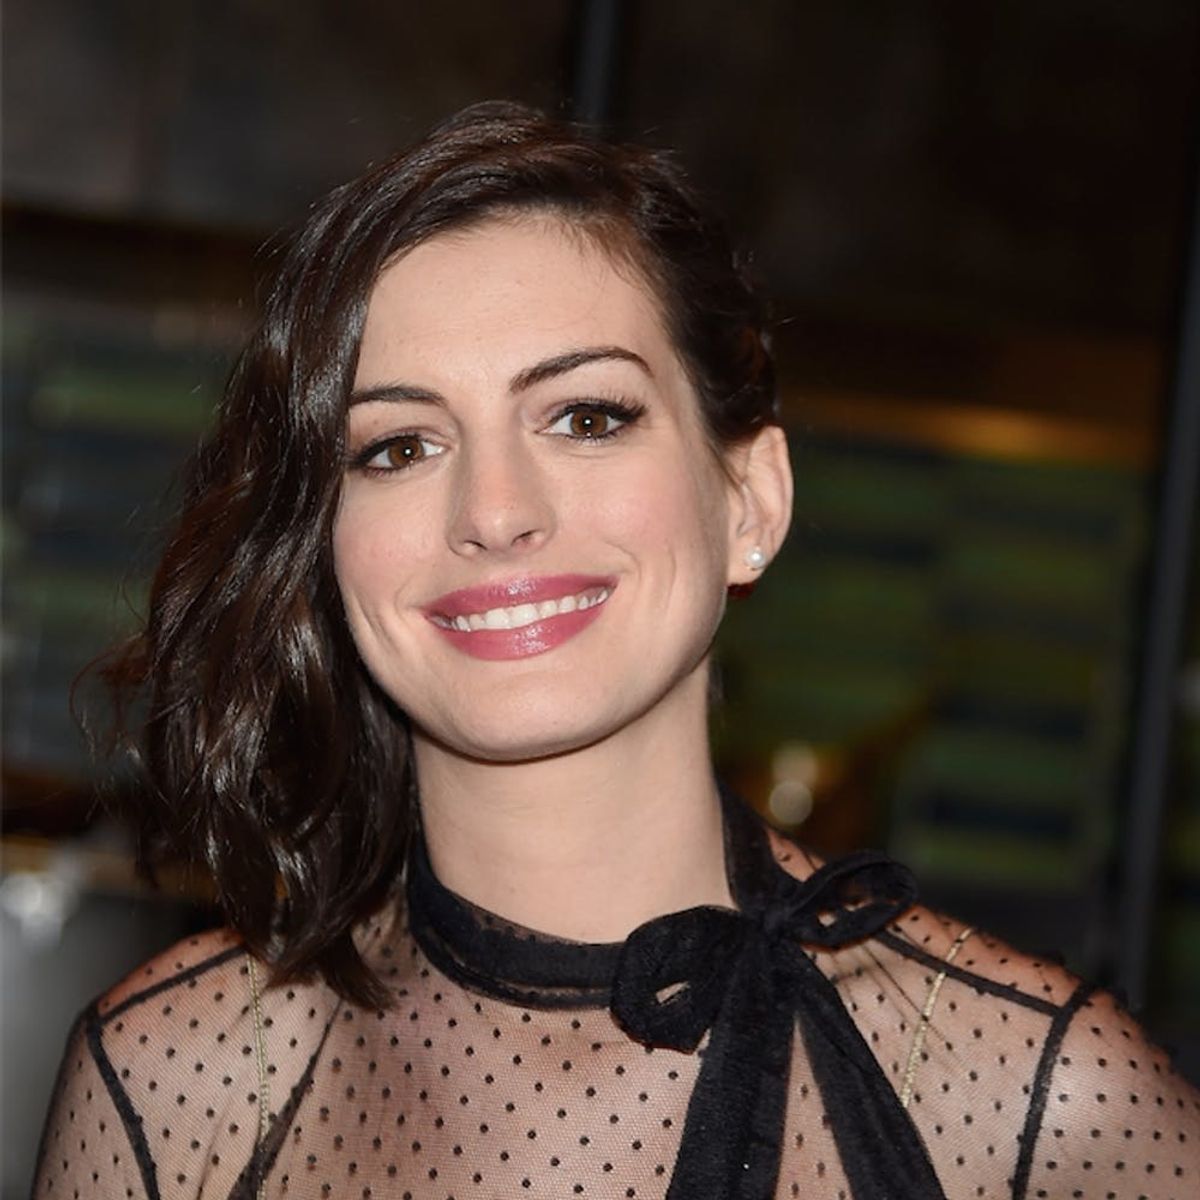 Anne Hathaway Posted Her OWN Baby Bump Reveal (and It’s Amazing)